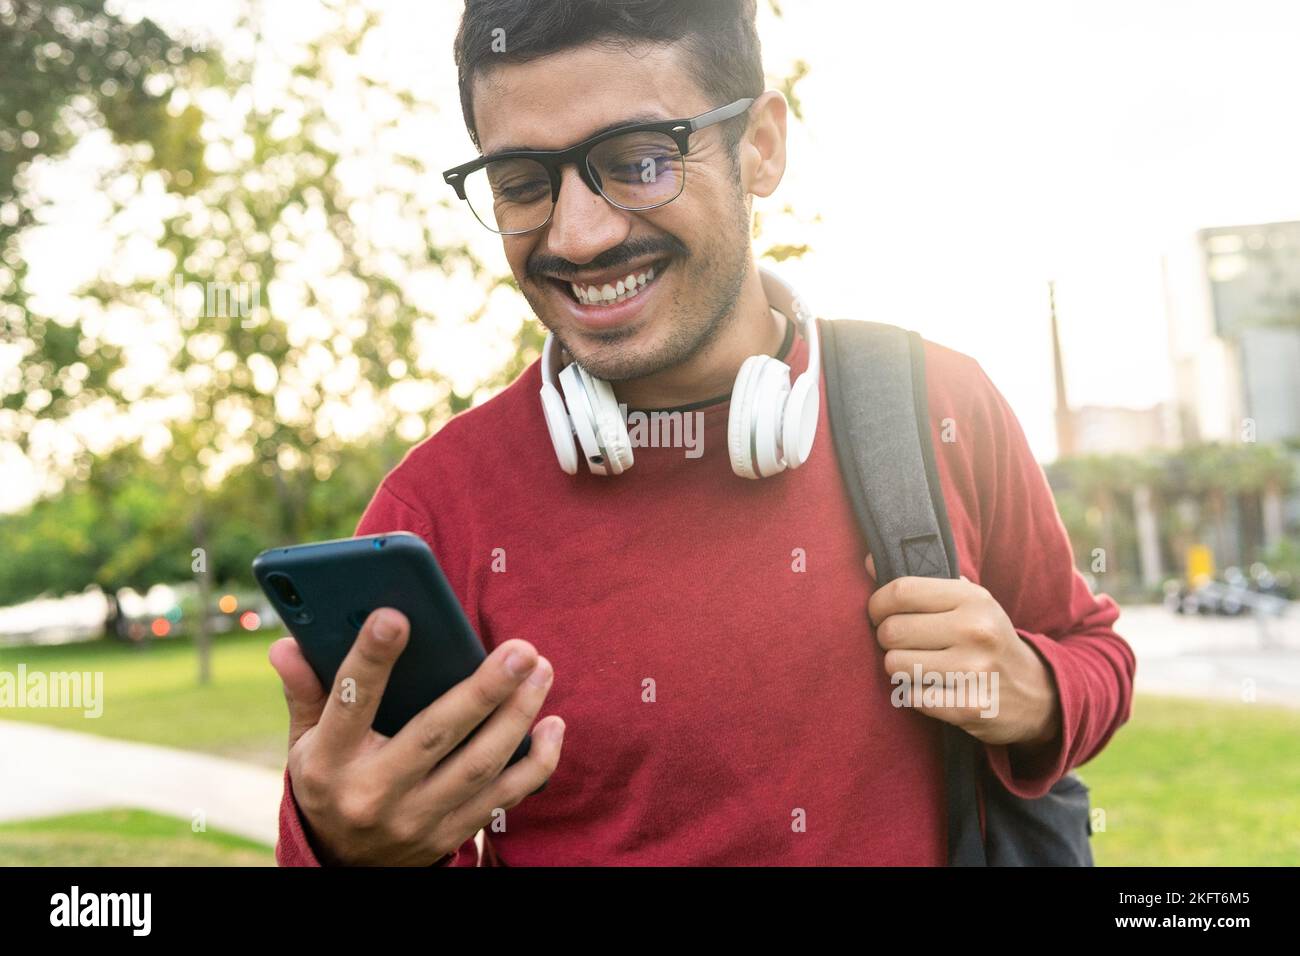 Smiling young man in red sweatshirt and headphones on neck with rucksack standing on city street browsing on mobile phone Stock Photo